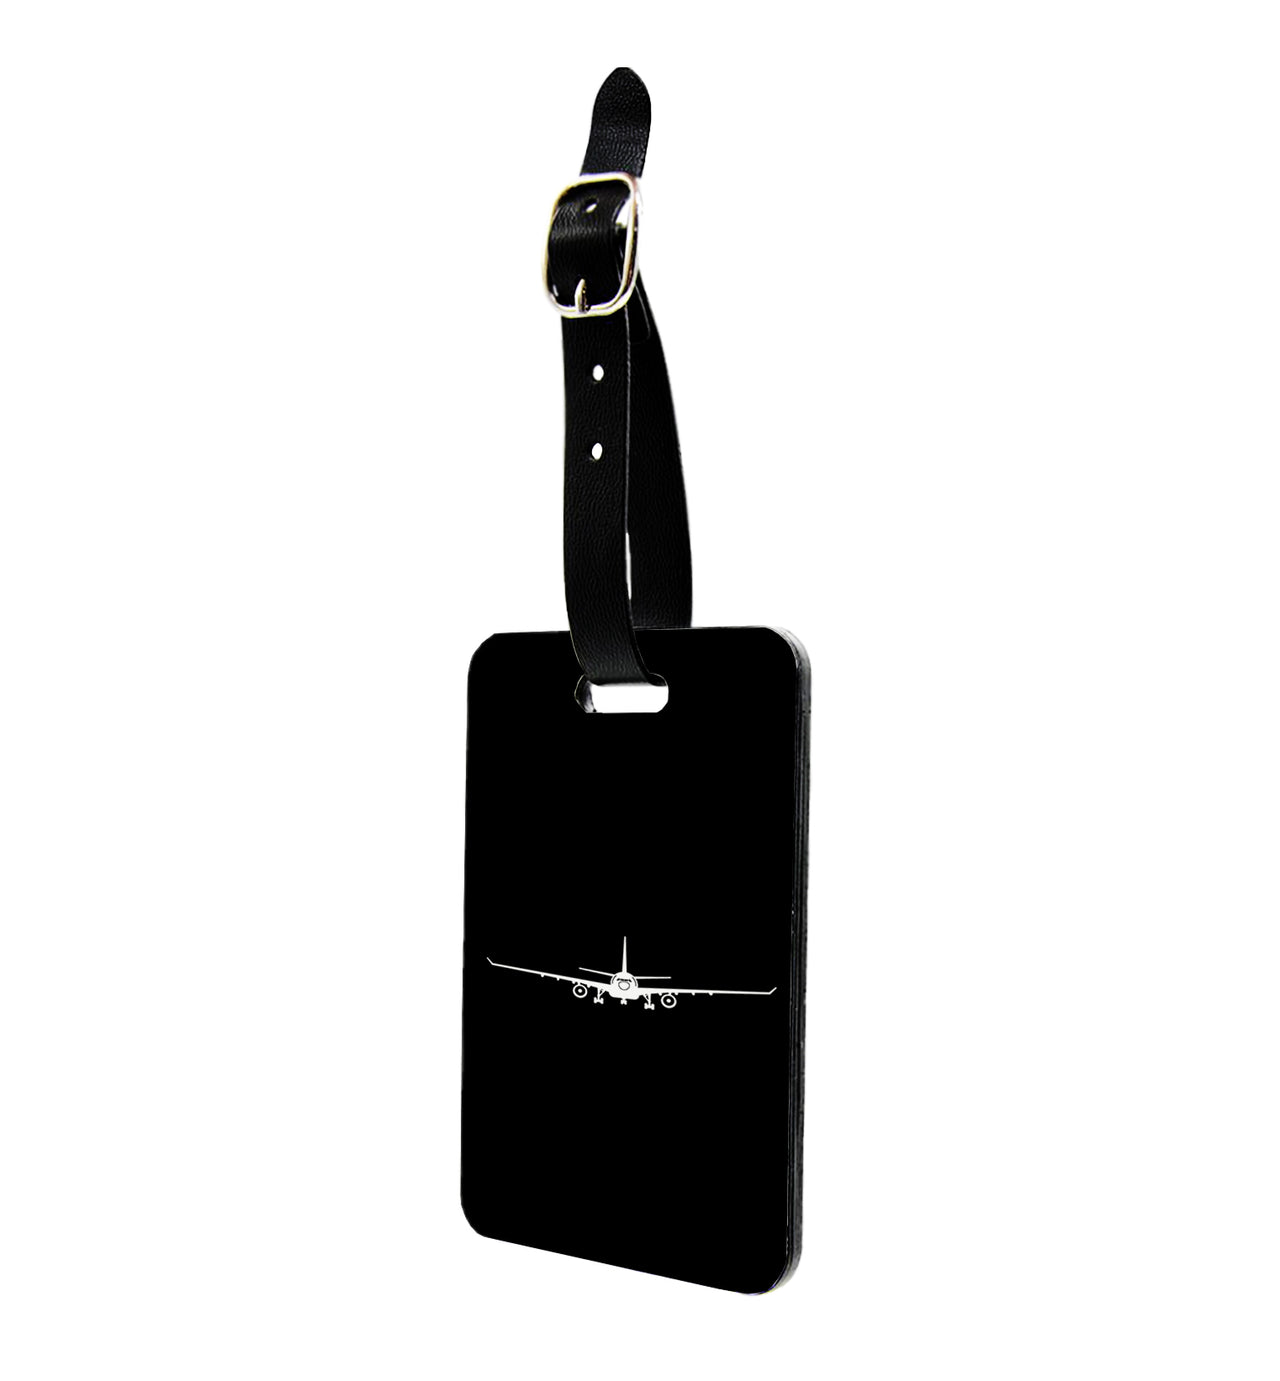 Airbus A330 Silhouette Designed Luggage Tag